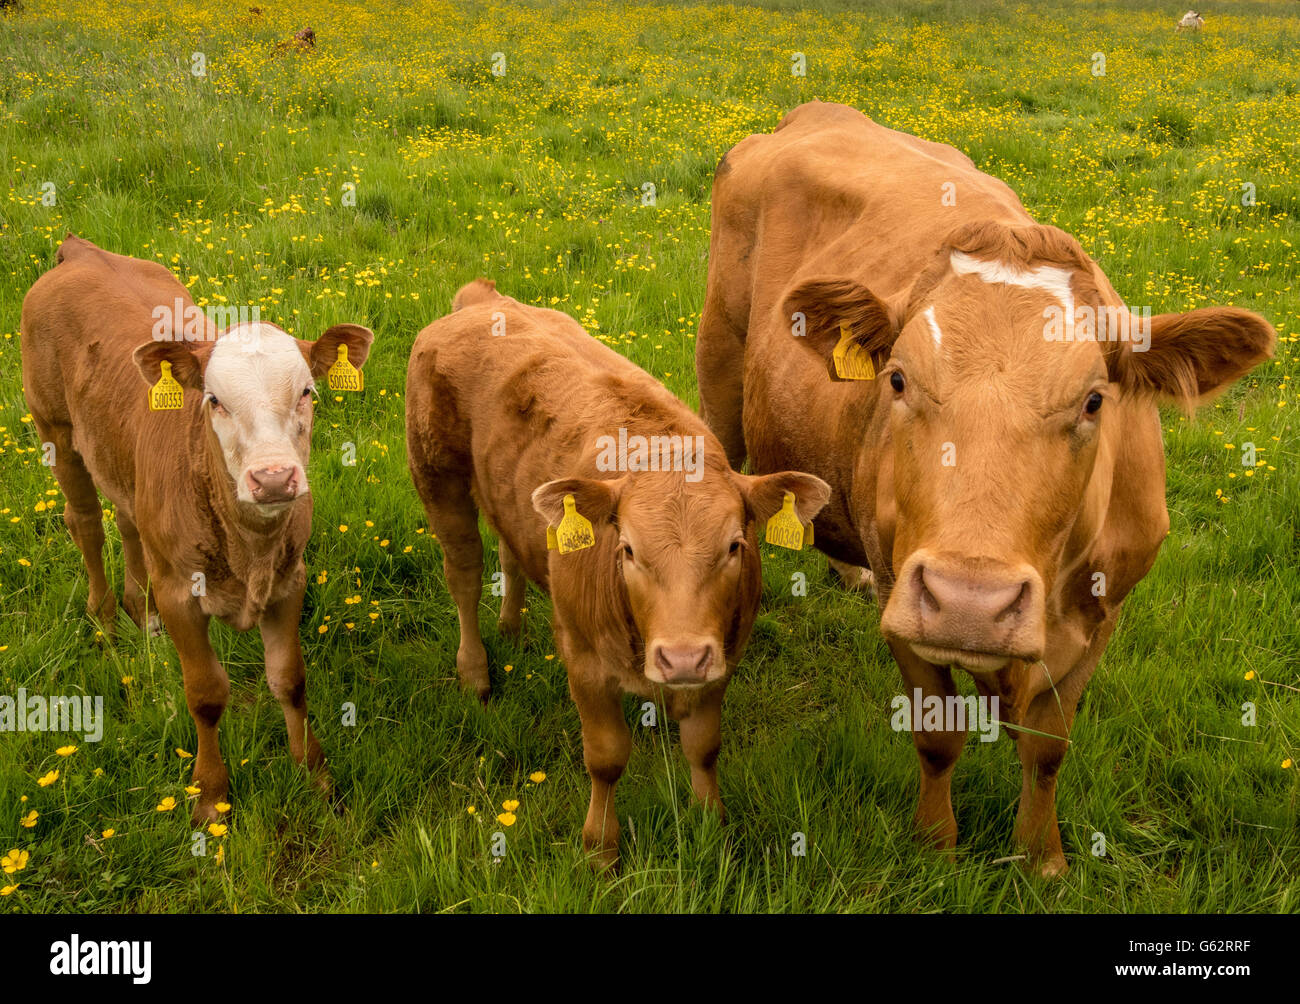 Cow and calves in field Stock Photo